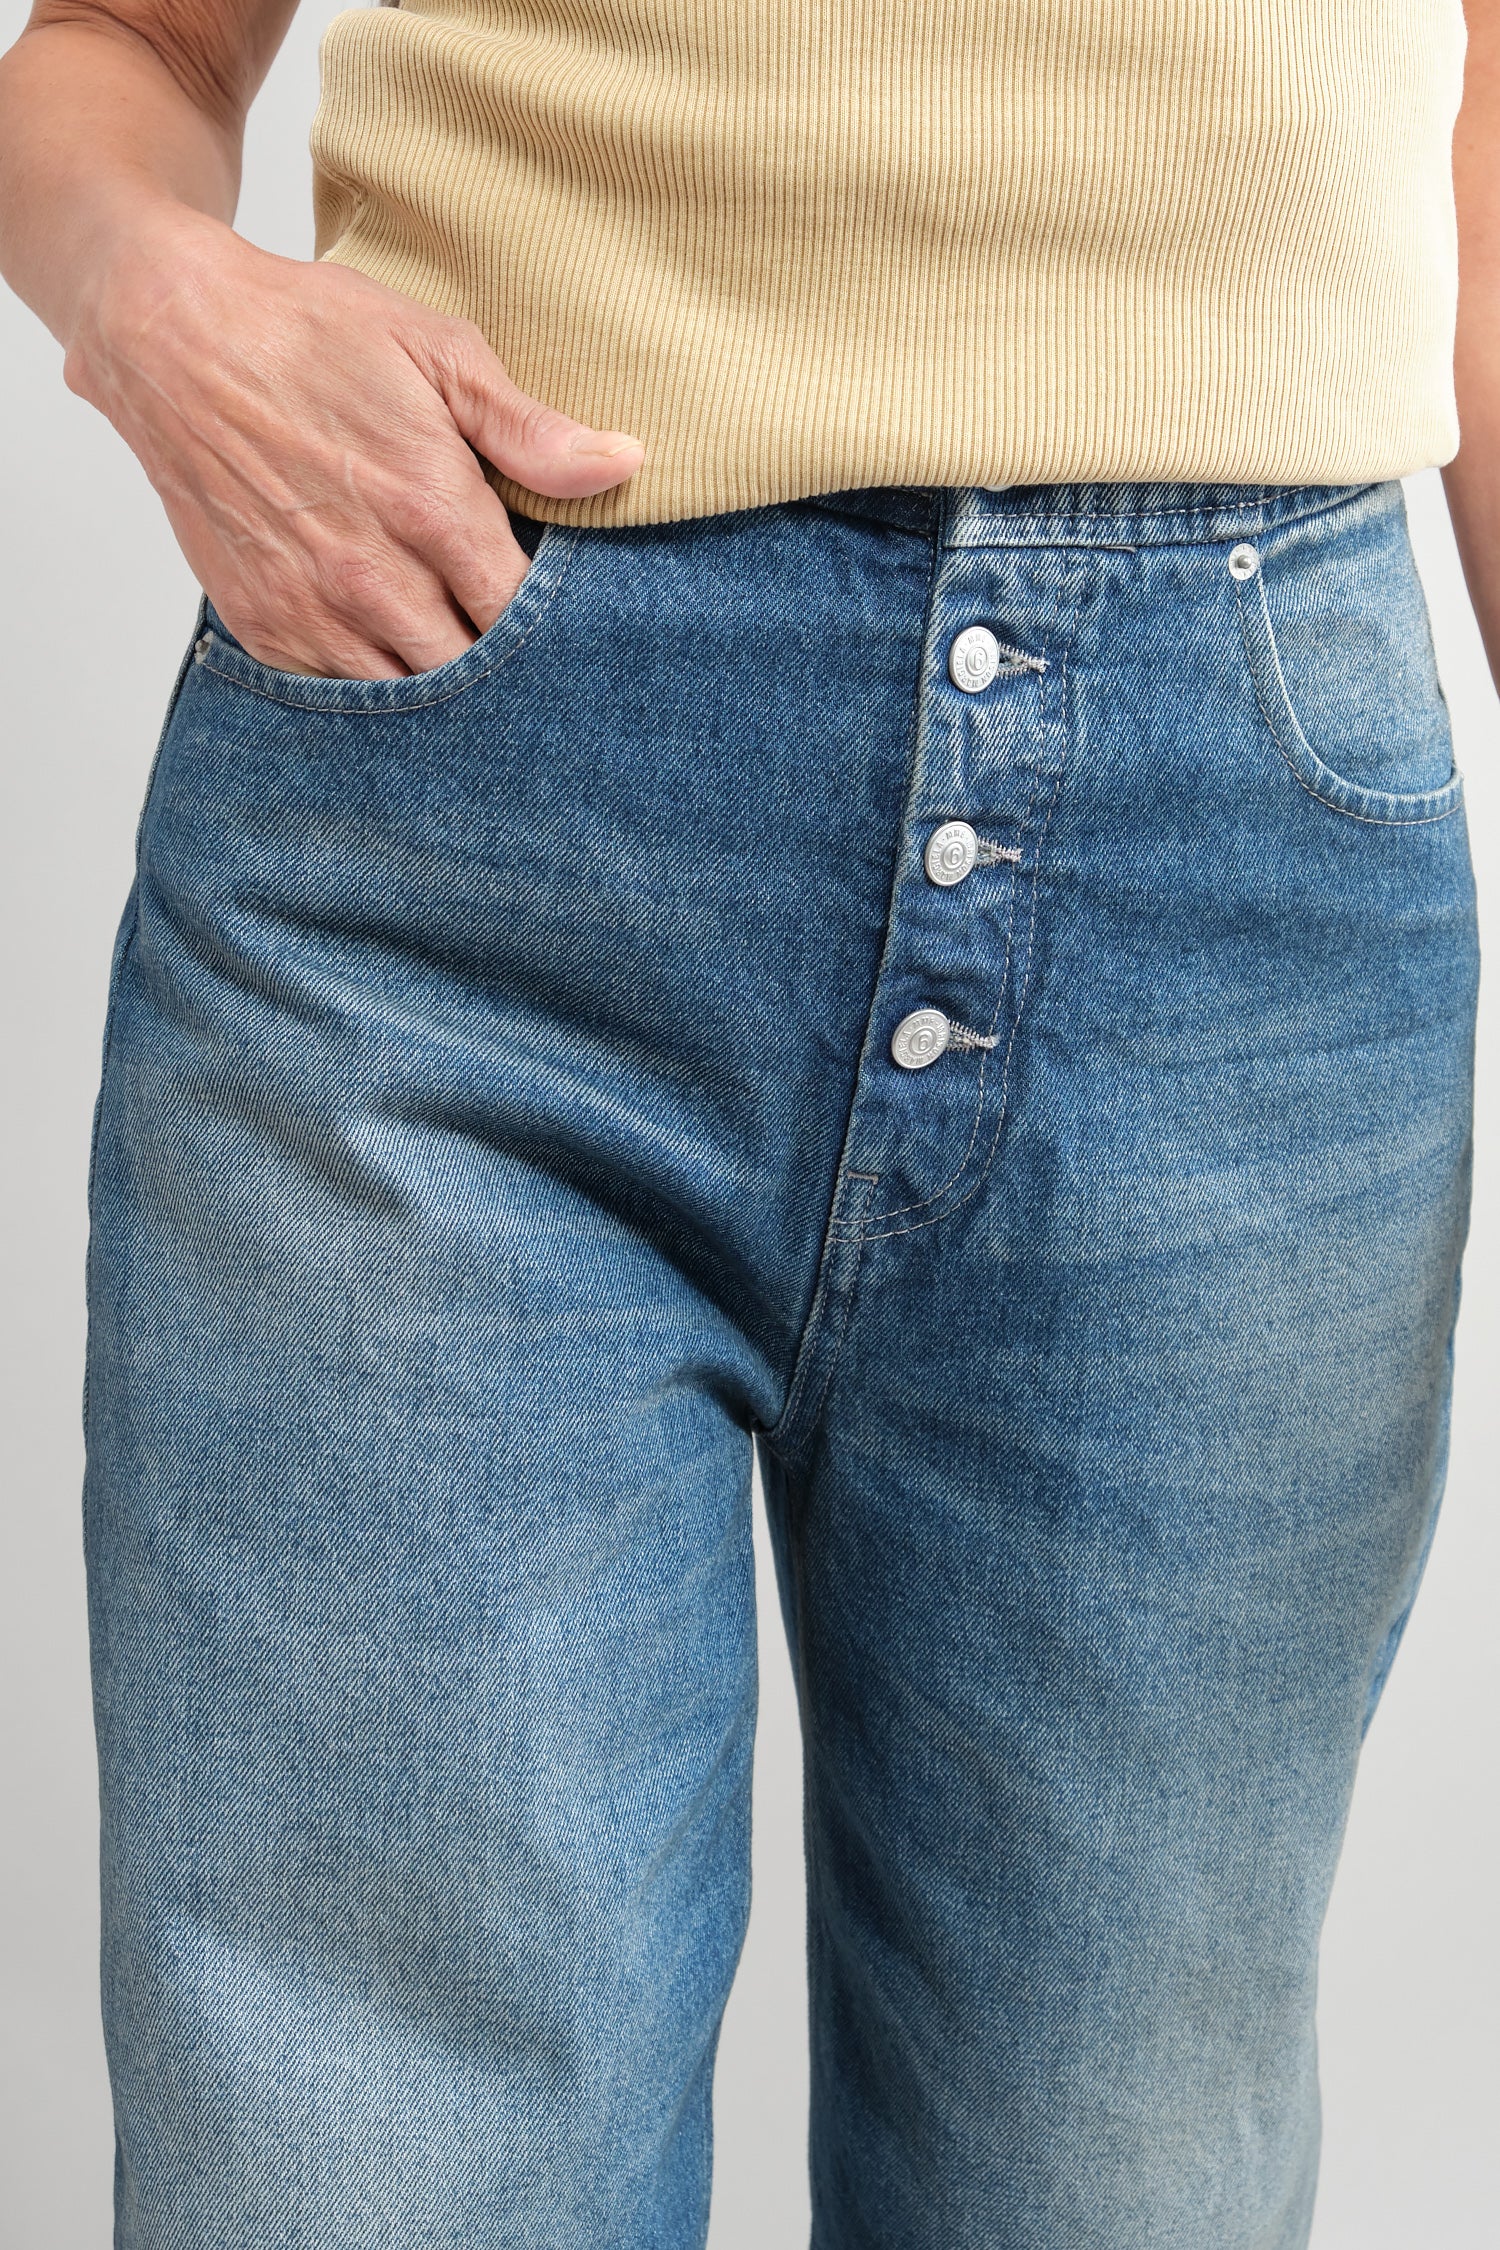 Button fly on Carrot Jeans in Medium Wash